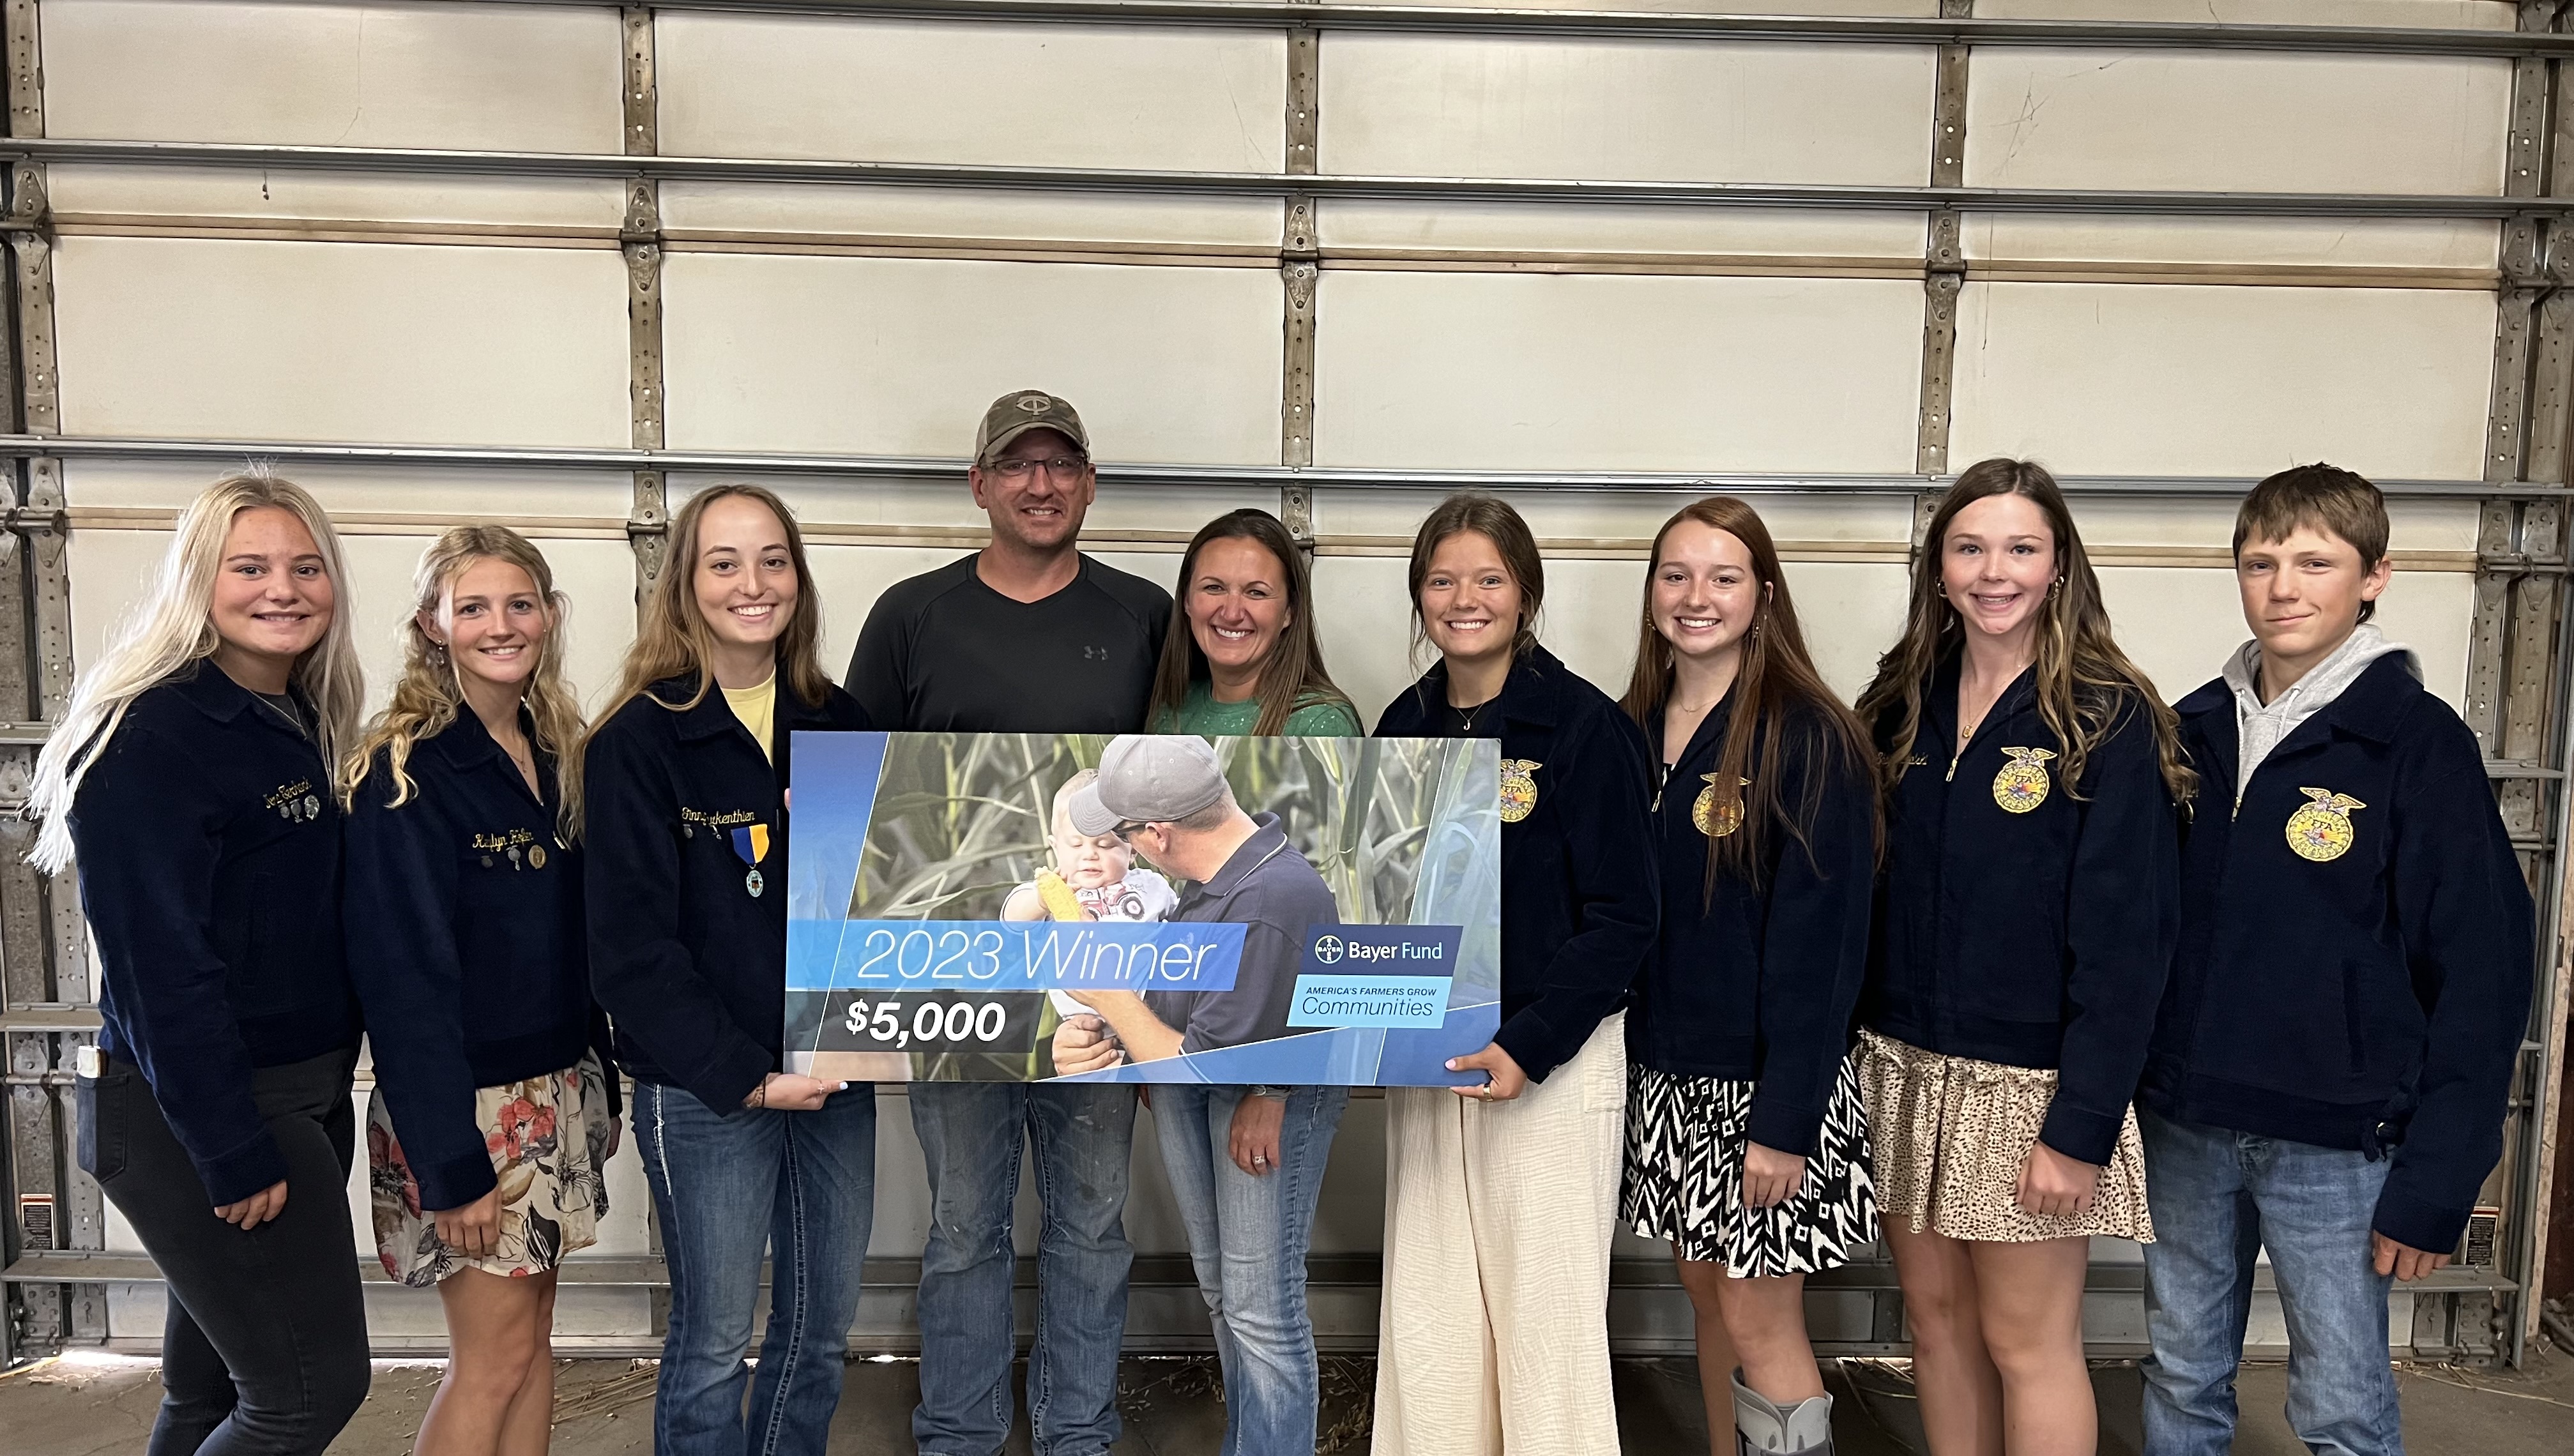 Pictured are the Willow Lake FFA officers receiving the Bayer Farmers Grow  Communities grant from Tony & Lucy Vandersnick.  From left to right, Nora Terhark, Kaylyn Hofer, Ginny Warkenthien, Tony Vandersnick, Lucy Vandersnick, Emma Peterson, Sami Brenden, Shay Michalski, and Andrew Peterson.